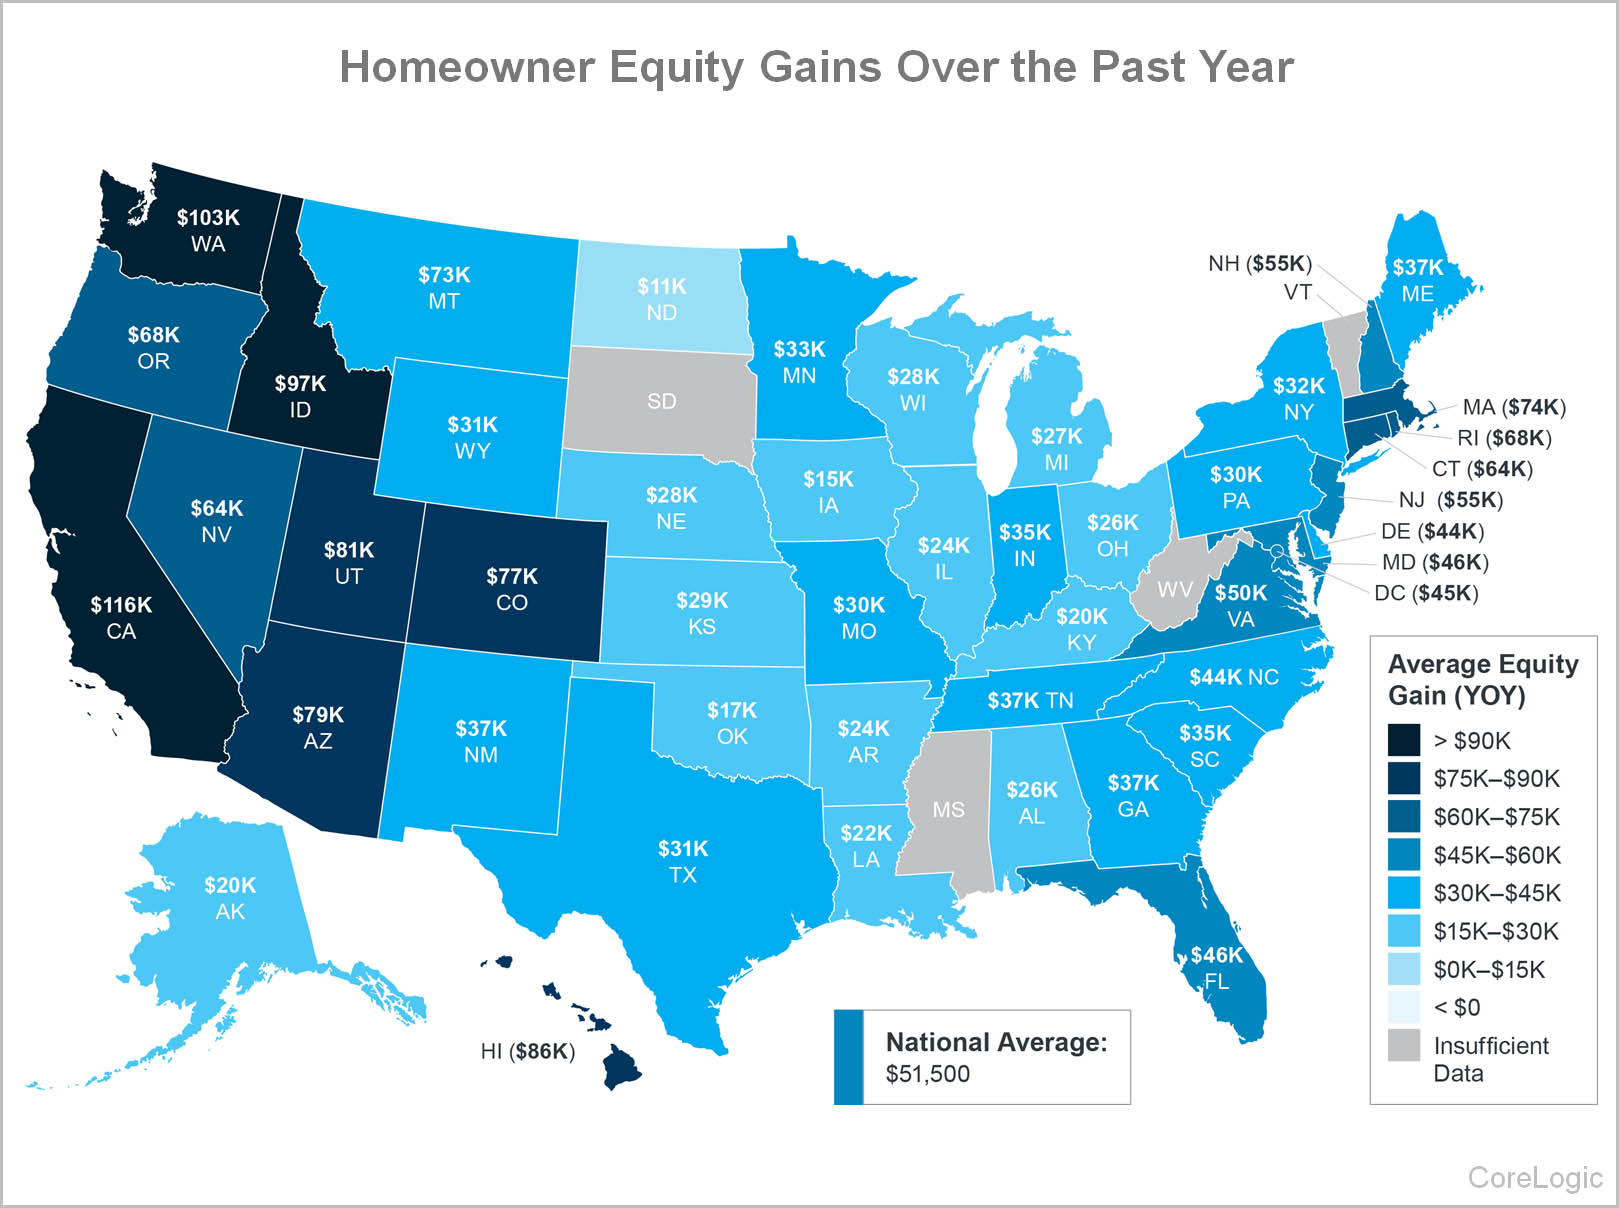 Homeowner Equity Gains Over the Past Year